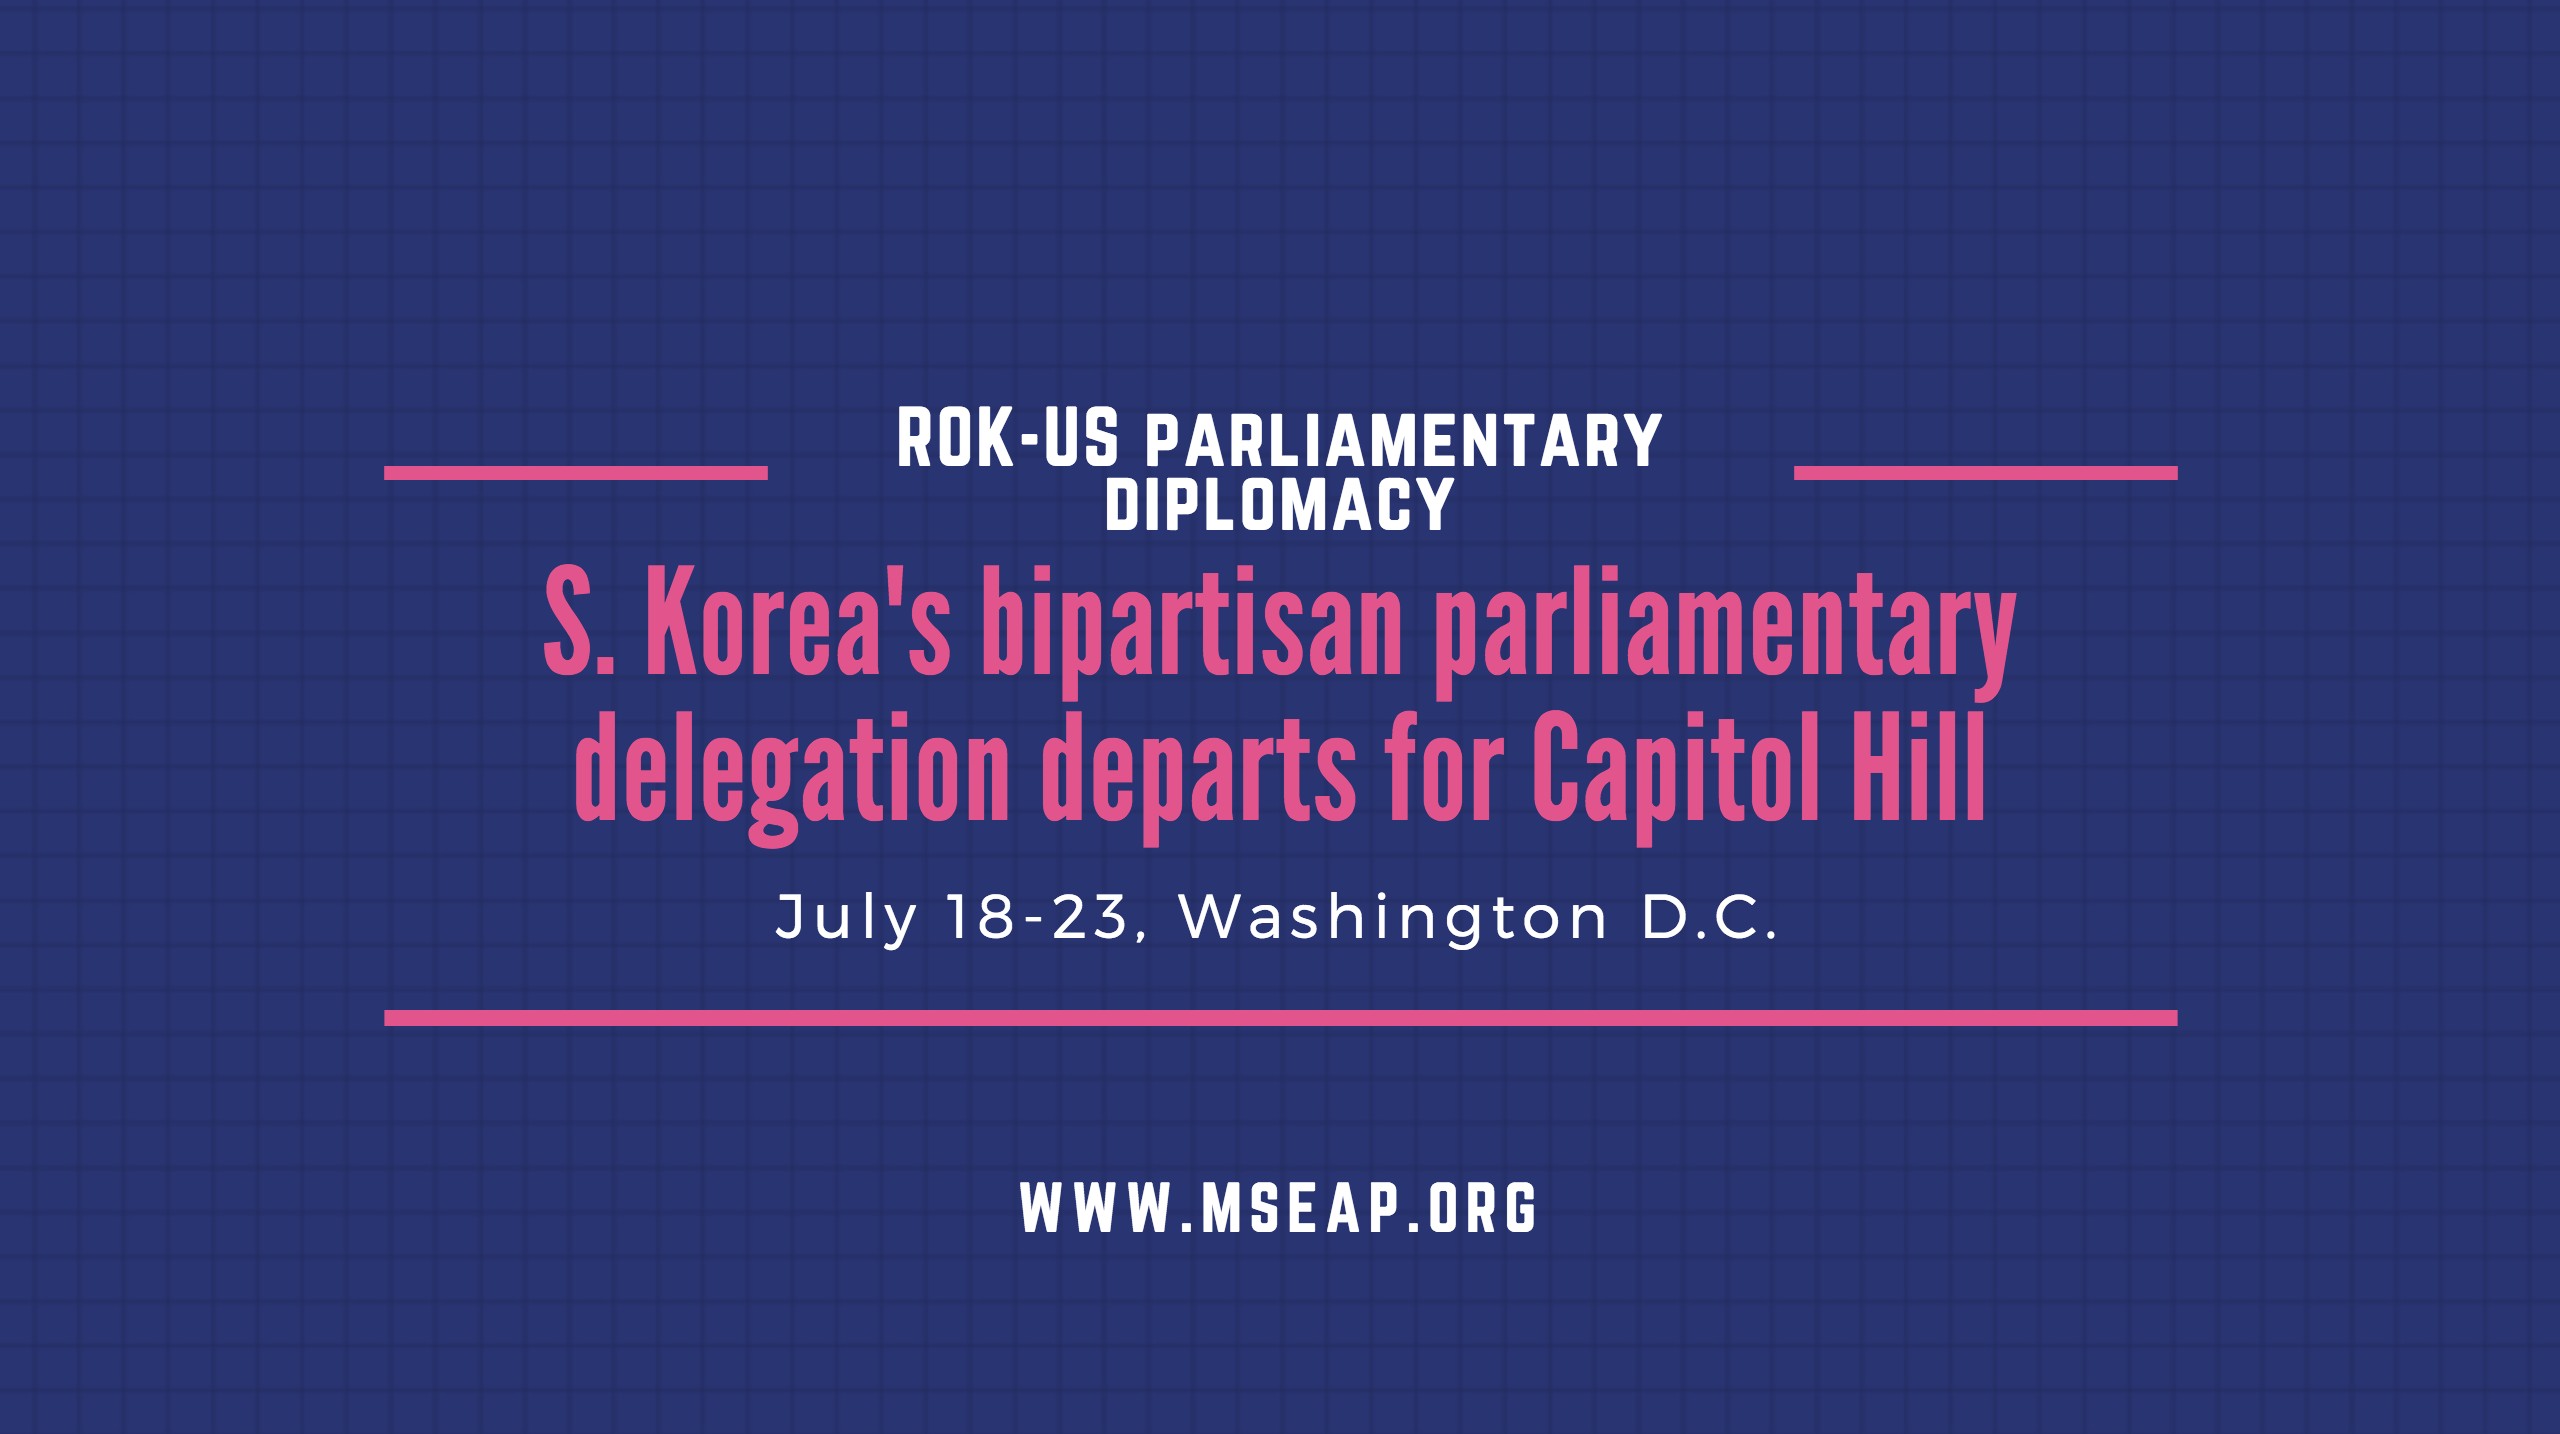 South Korea’s bipartisan parliamentary delegation departs for Capitol Hill